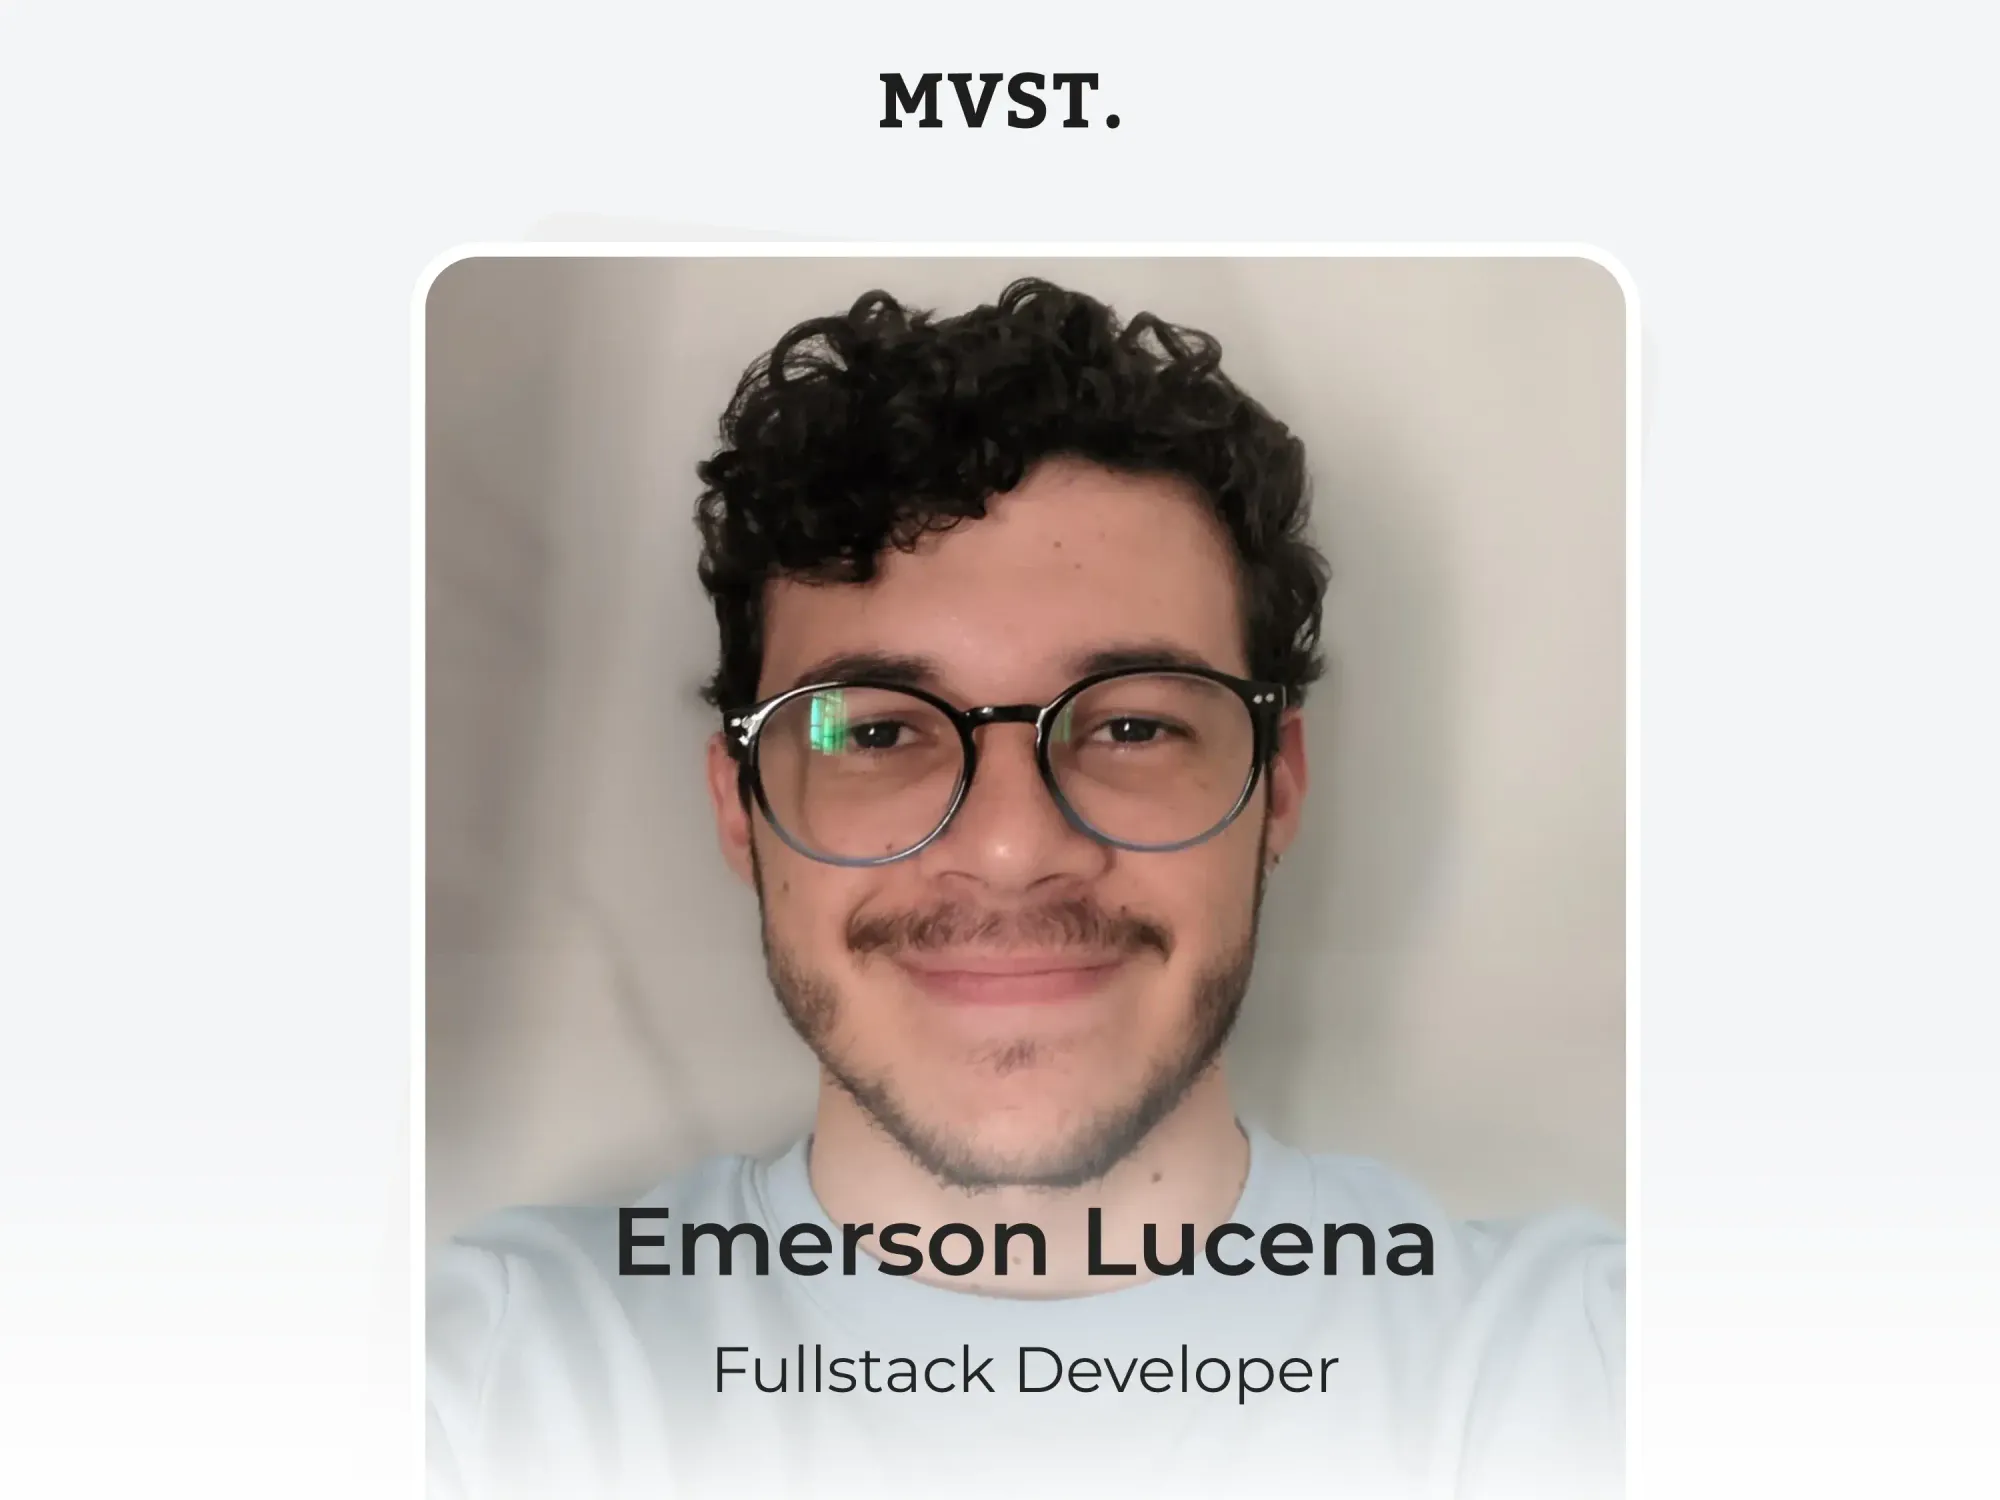 Welcome to MVST, Emerson!